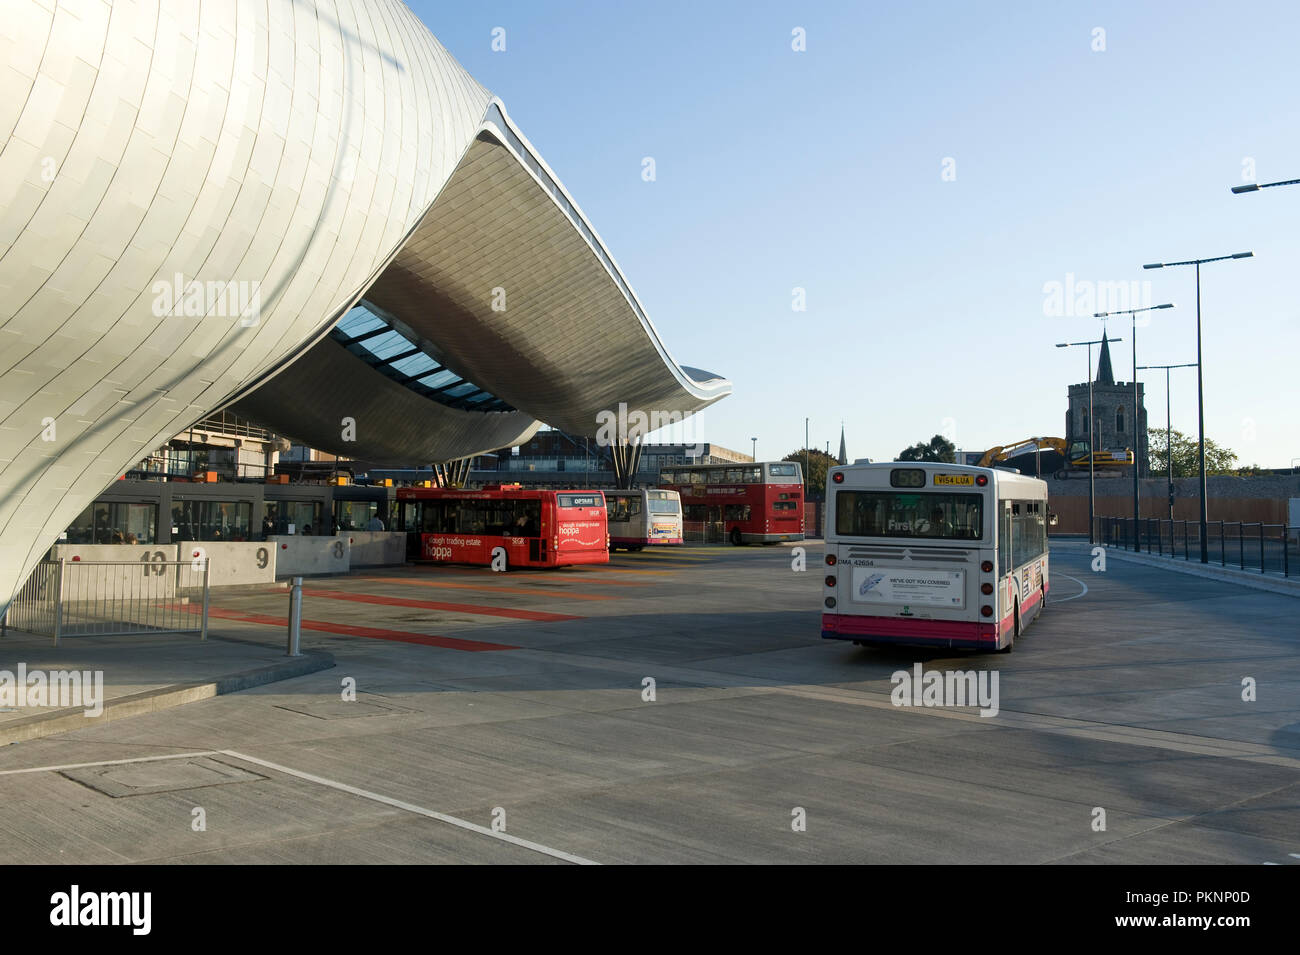 Slough Bus Station High Resolution Stock Photography and Images - Alamy